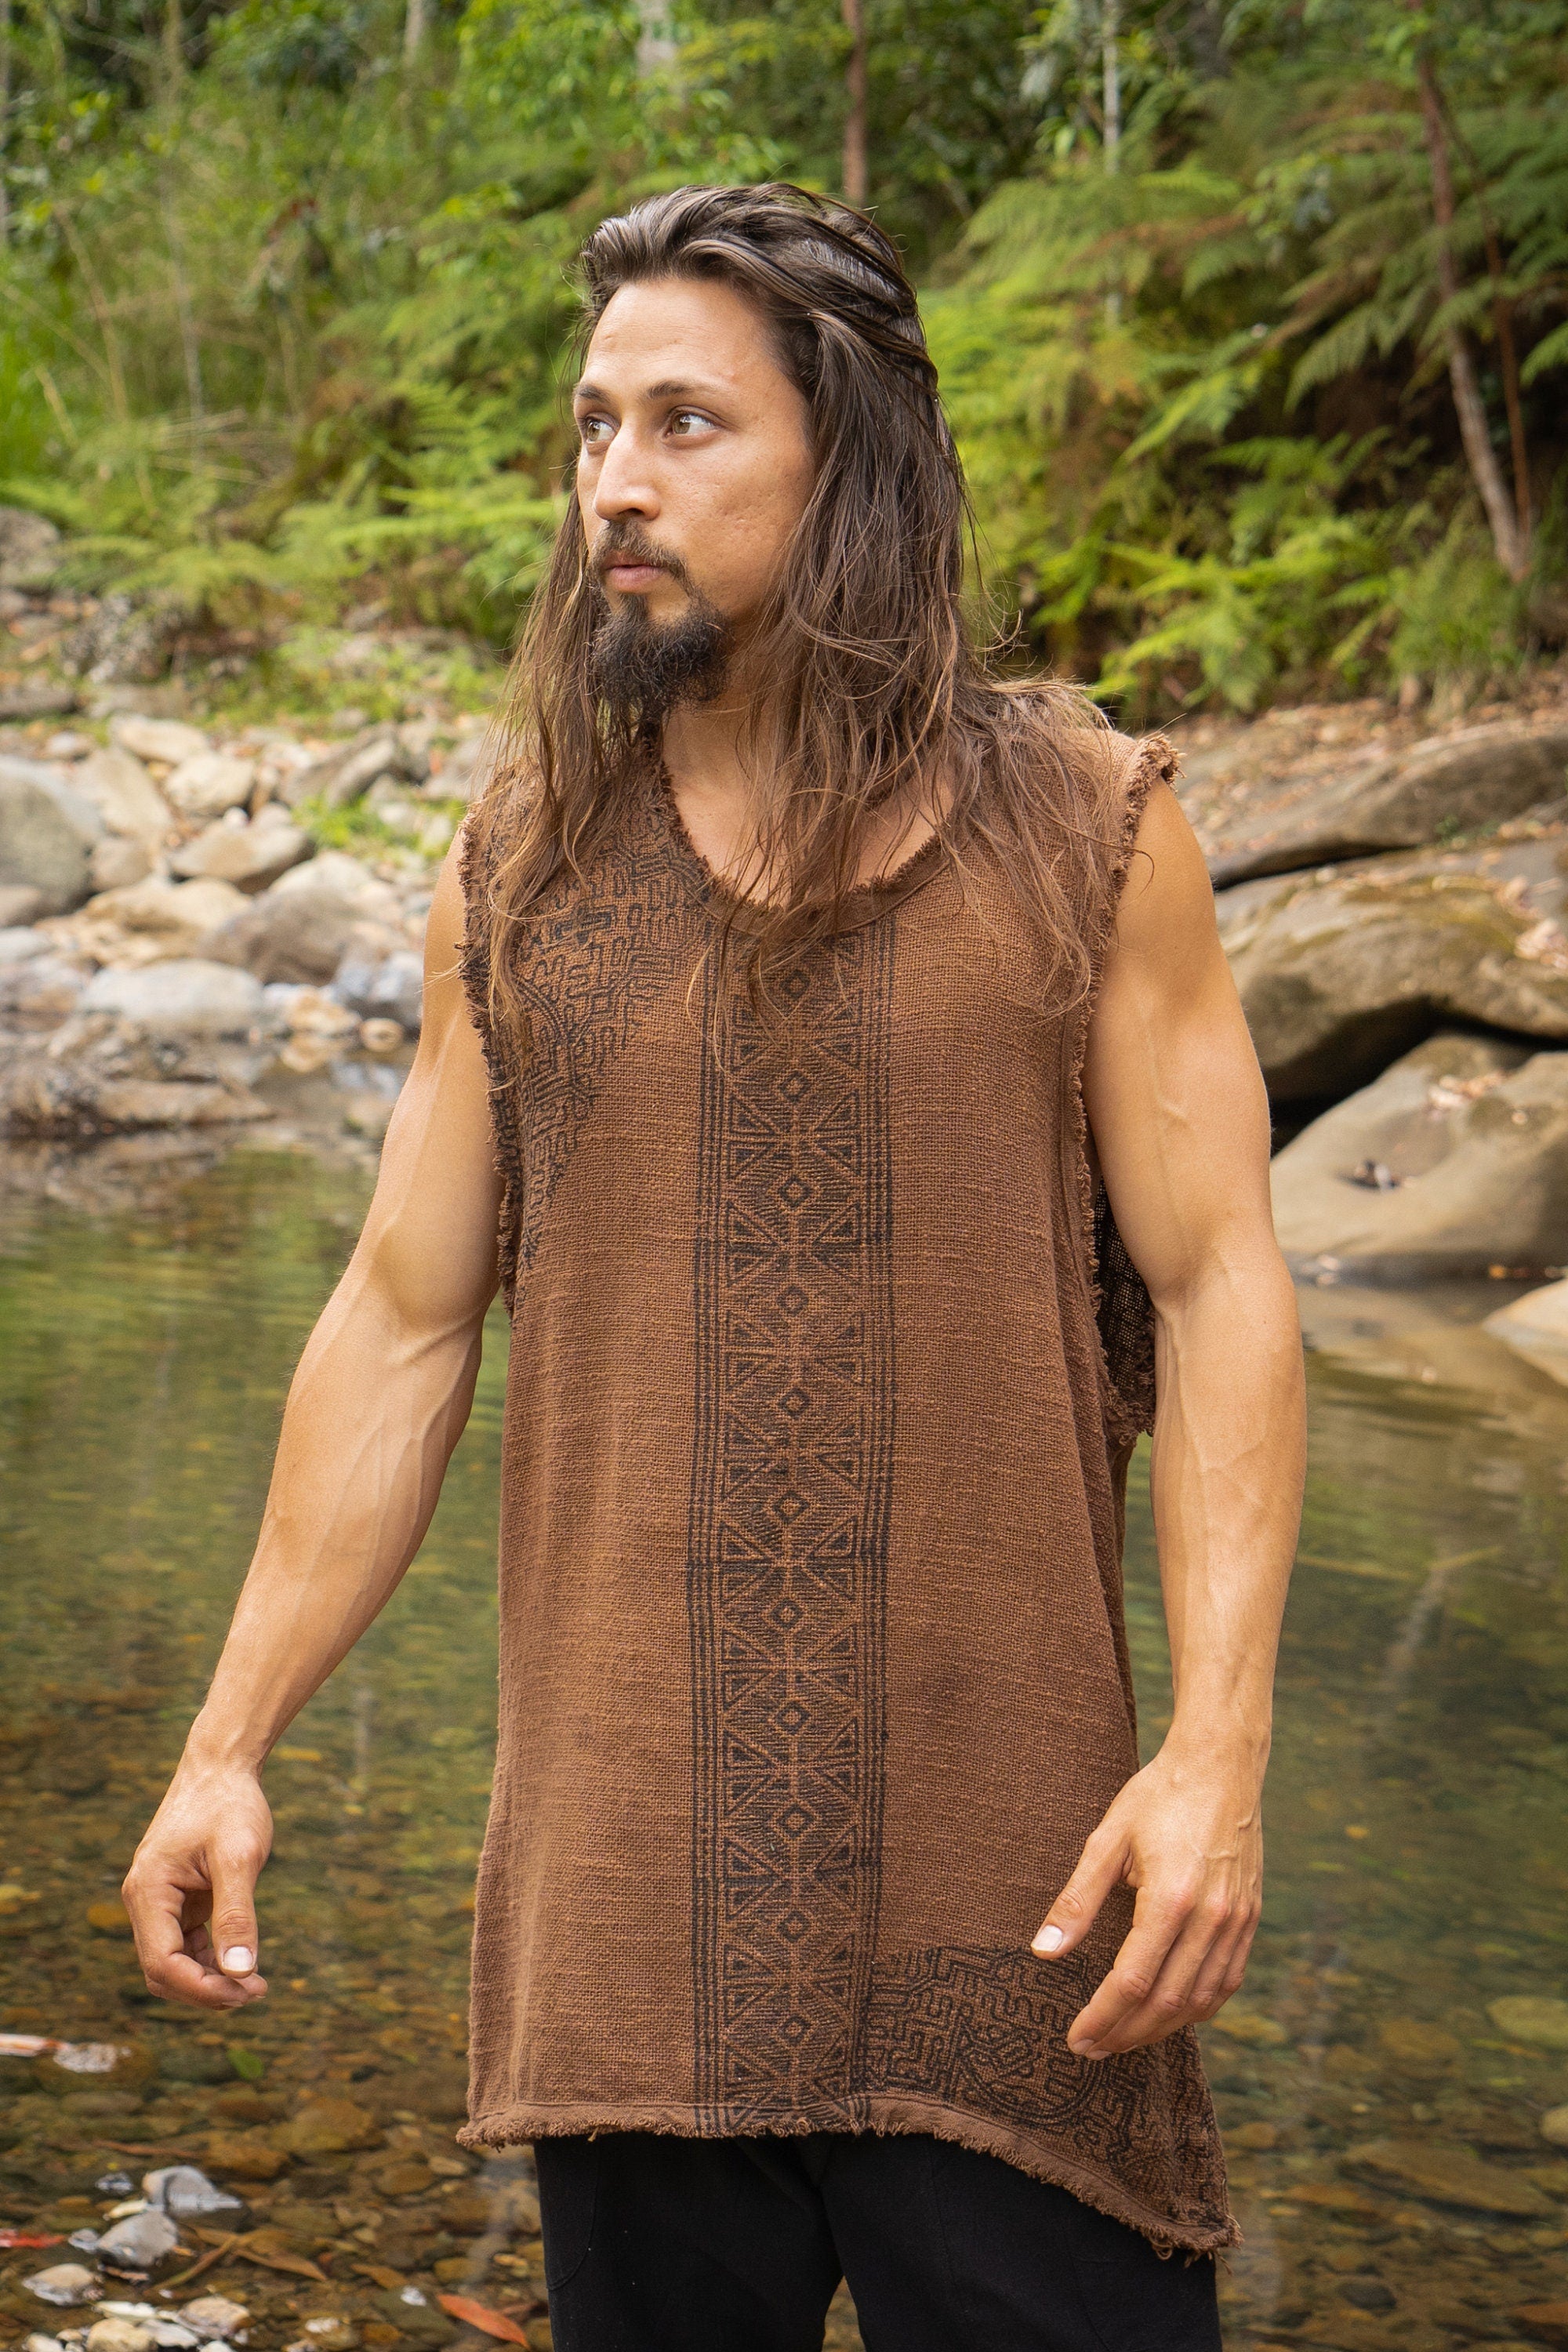 Our AKAU shamanic tank top features intricate block-printed shipibo tribal patterns that are hand-applied, giving each shirt a unique and authentic touch..